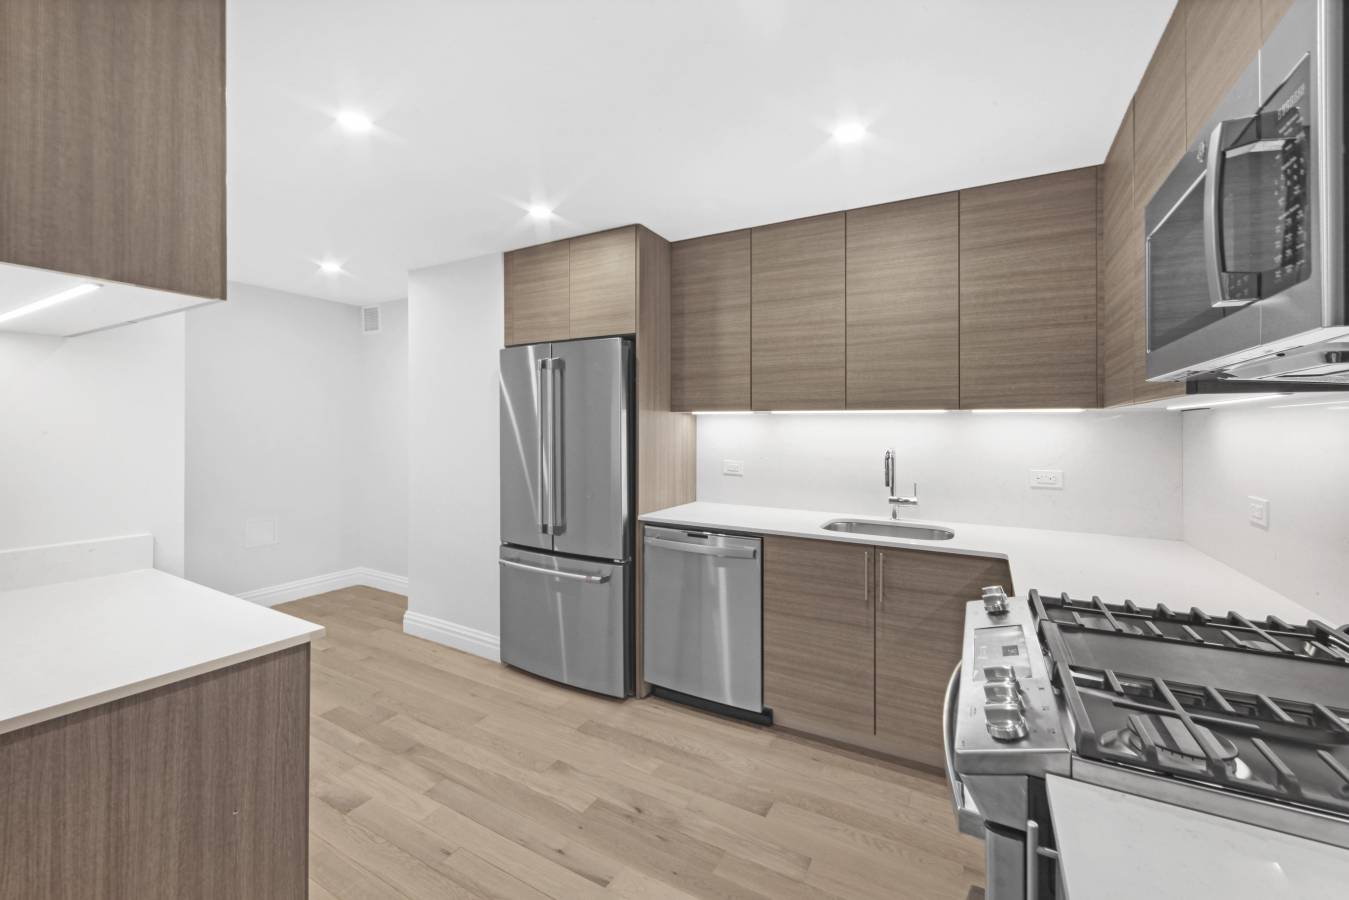 FULLY RENOVATED UWS 3 BEDROOM